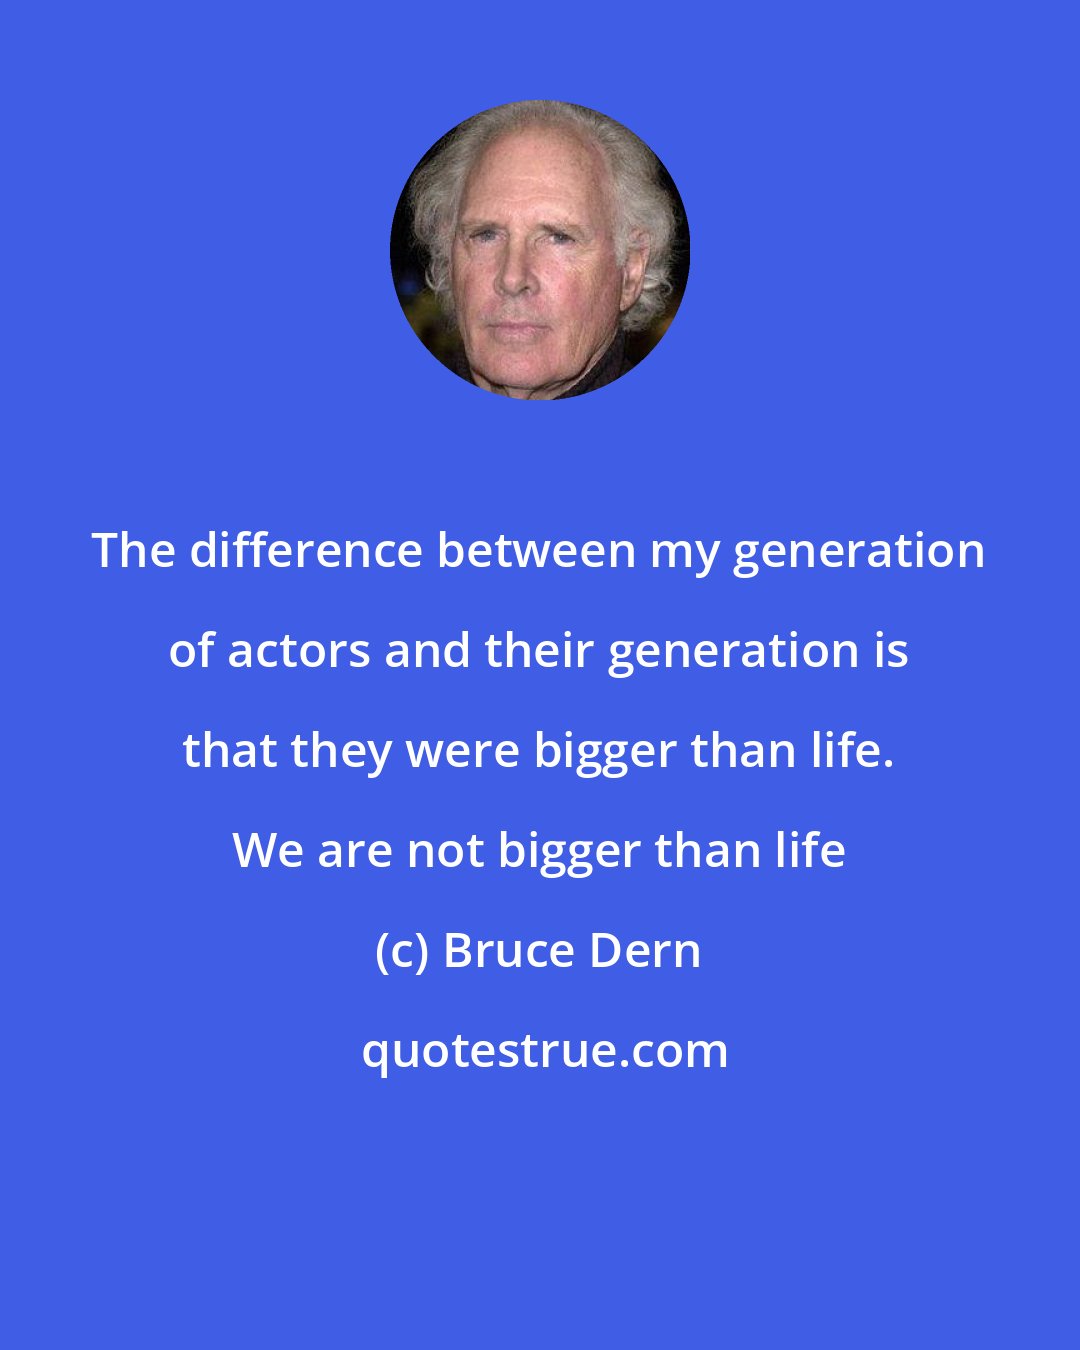 Bruce Dern: The difference between my generation of actors and their generation is that they were bigger than life. We are not bigger than life